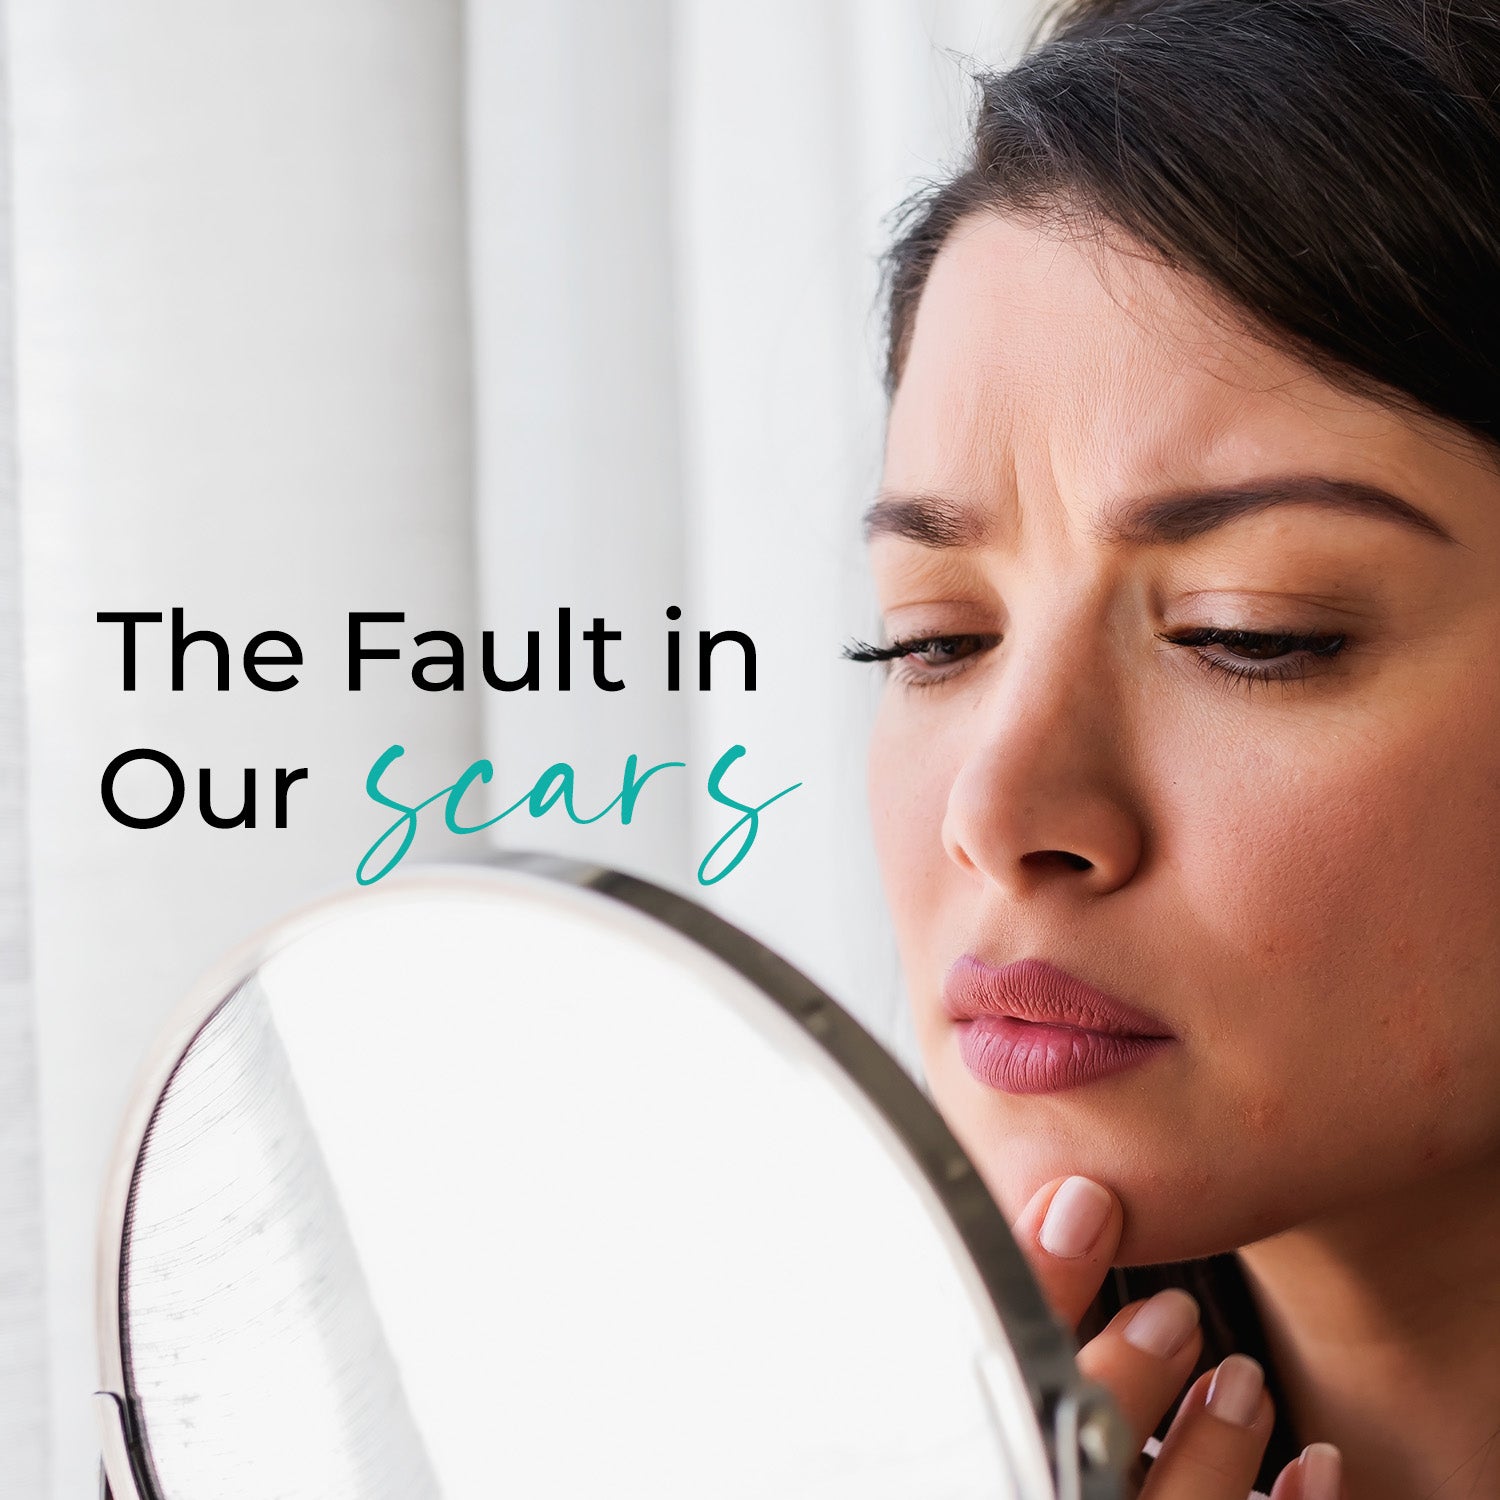 The Fault in Our Scars: All About Scars and How to Treat Them